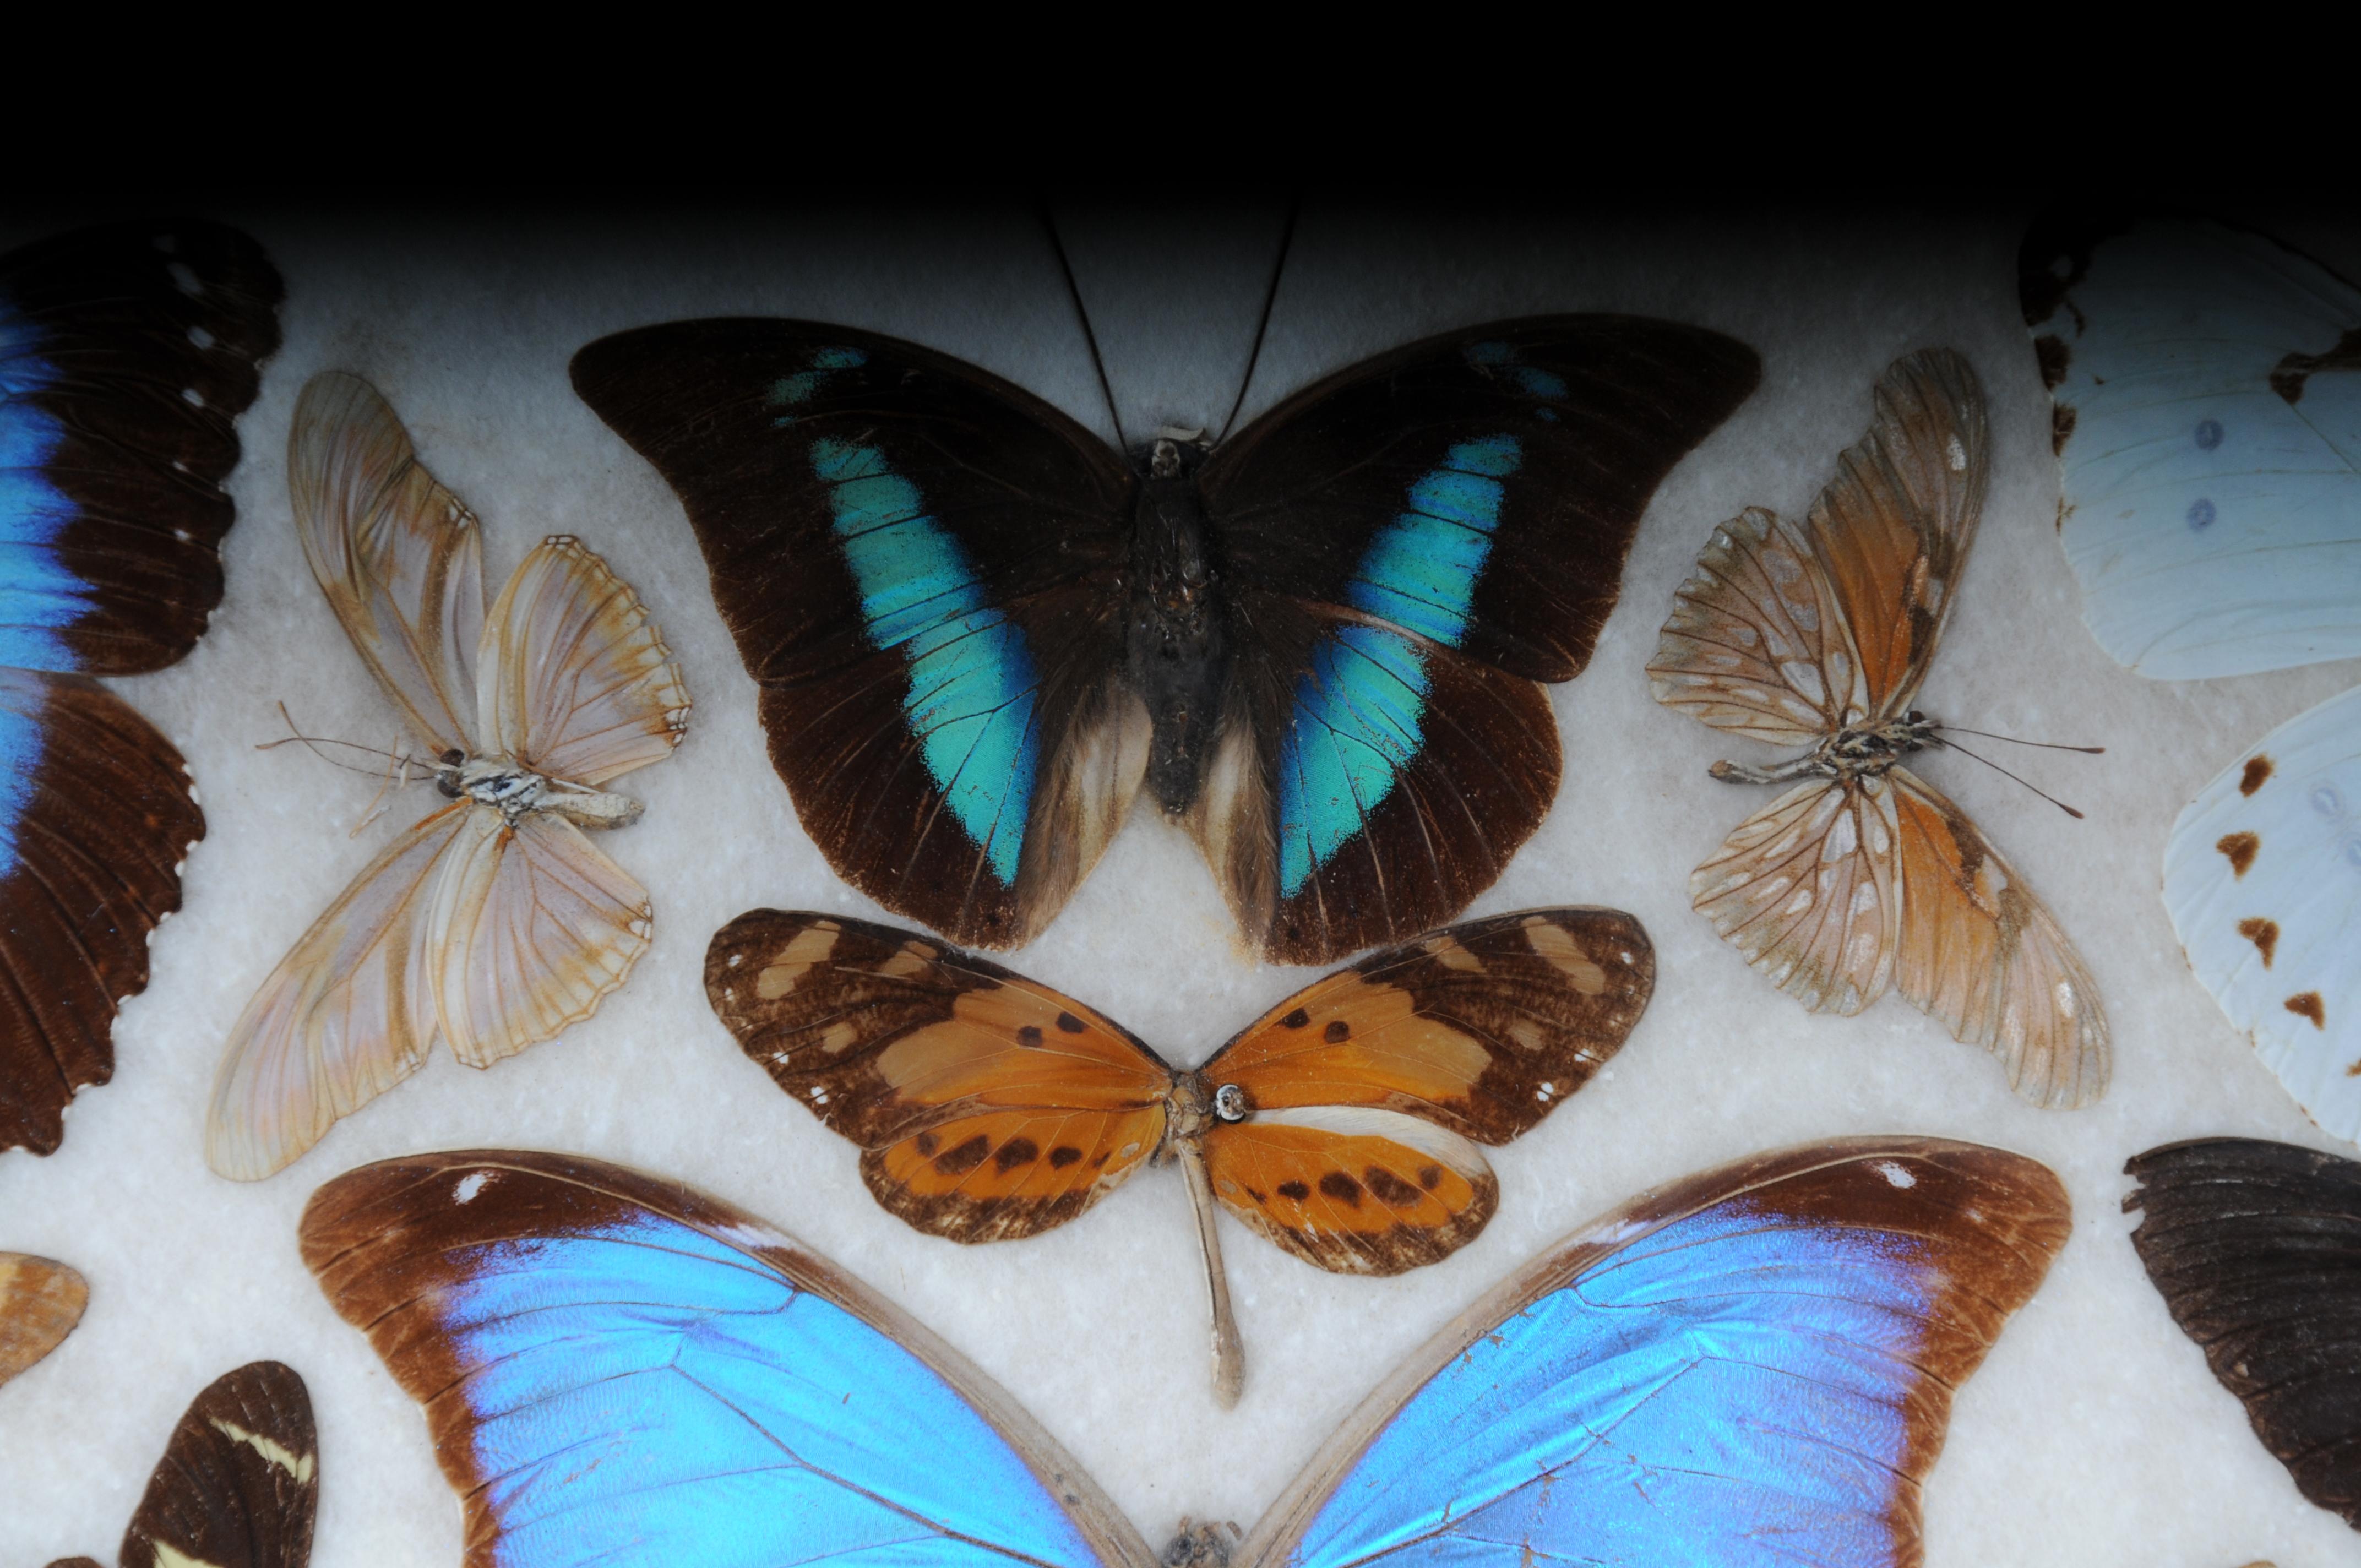 German Curious antique tray with real butterfly specimens. Very rare For Sale